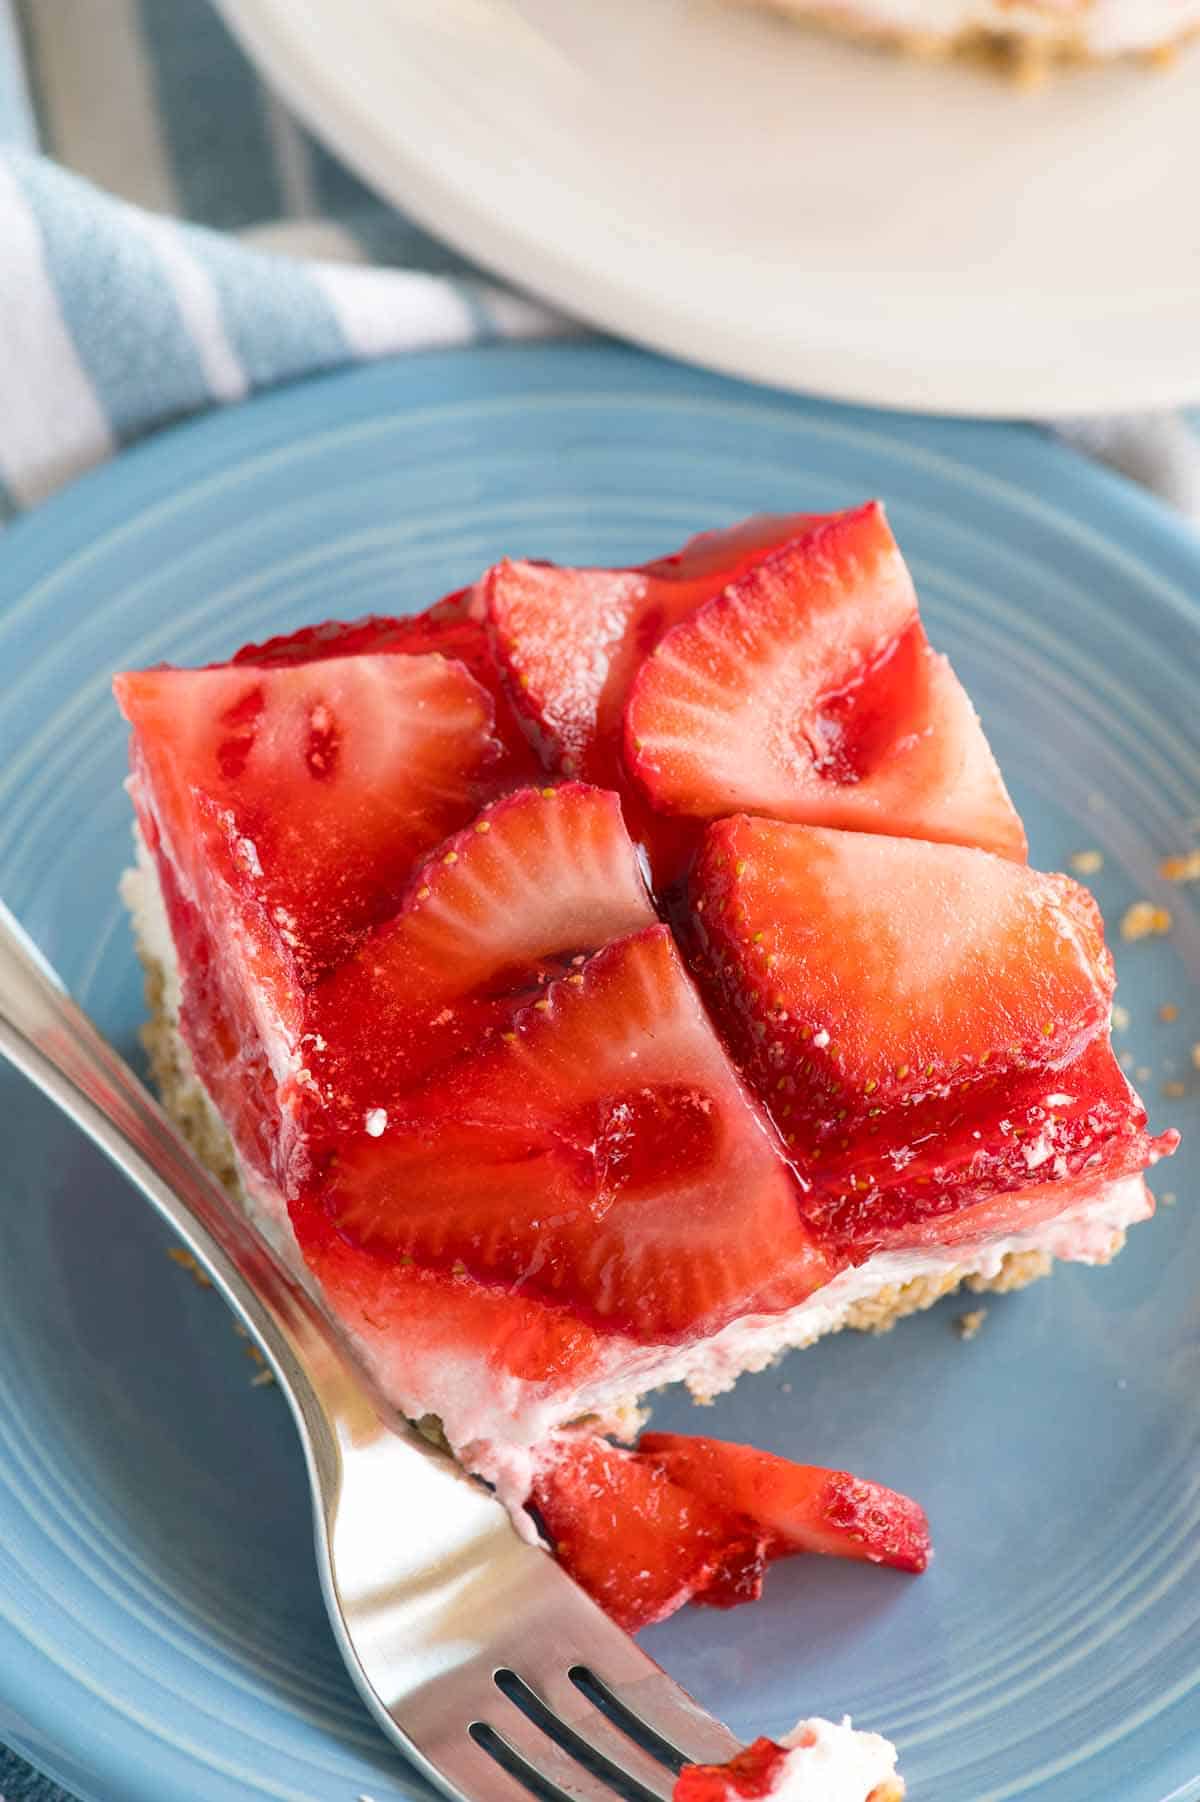 strawberry dessert on a blue plate with fork